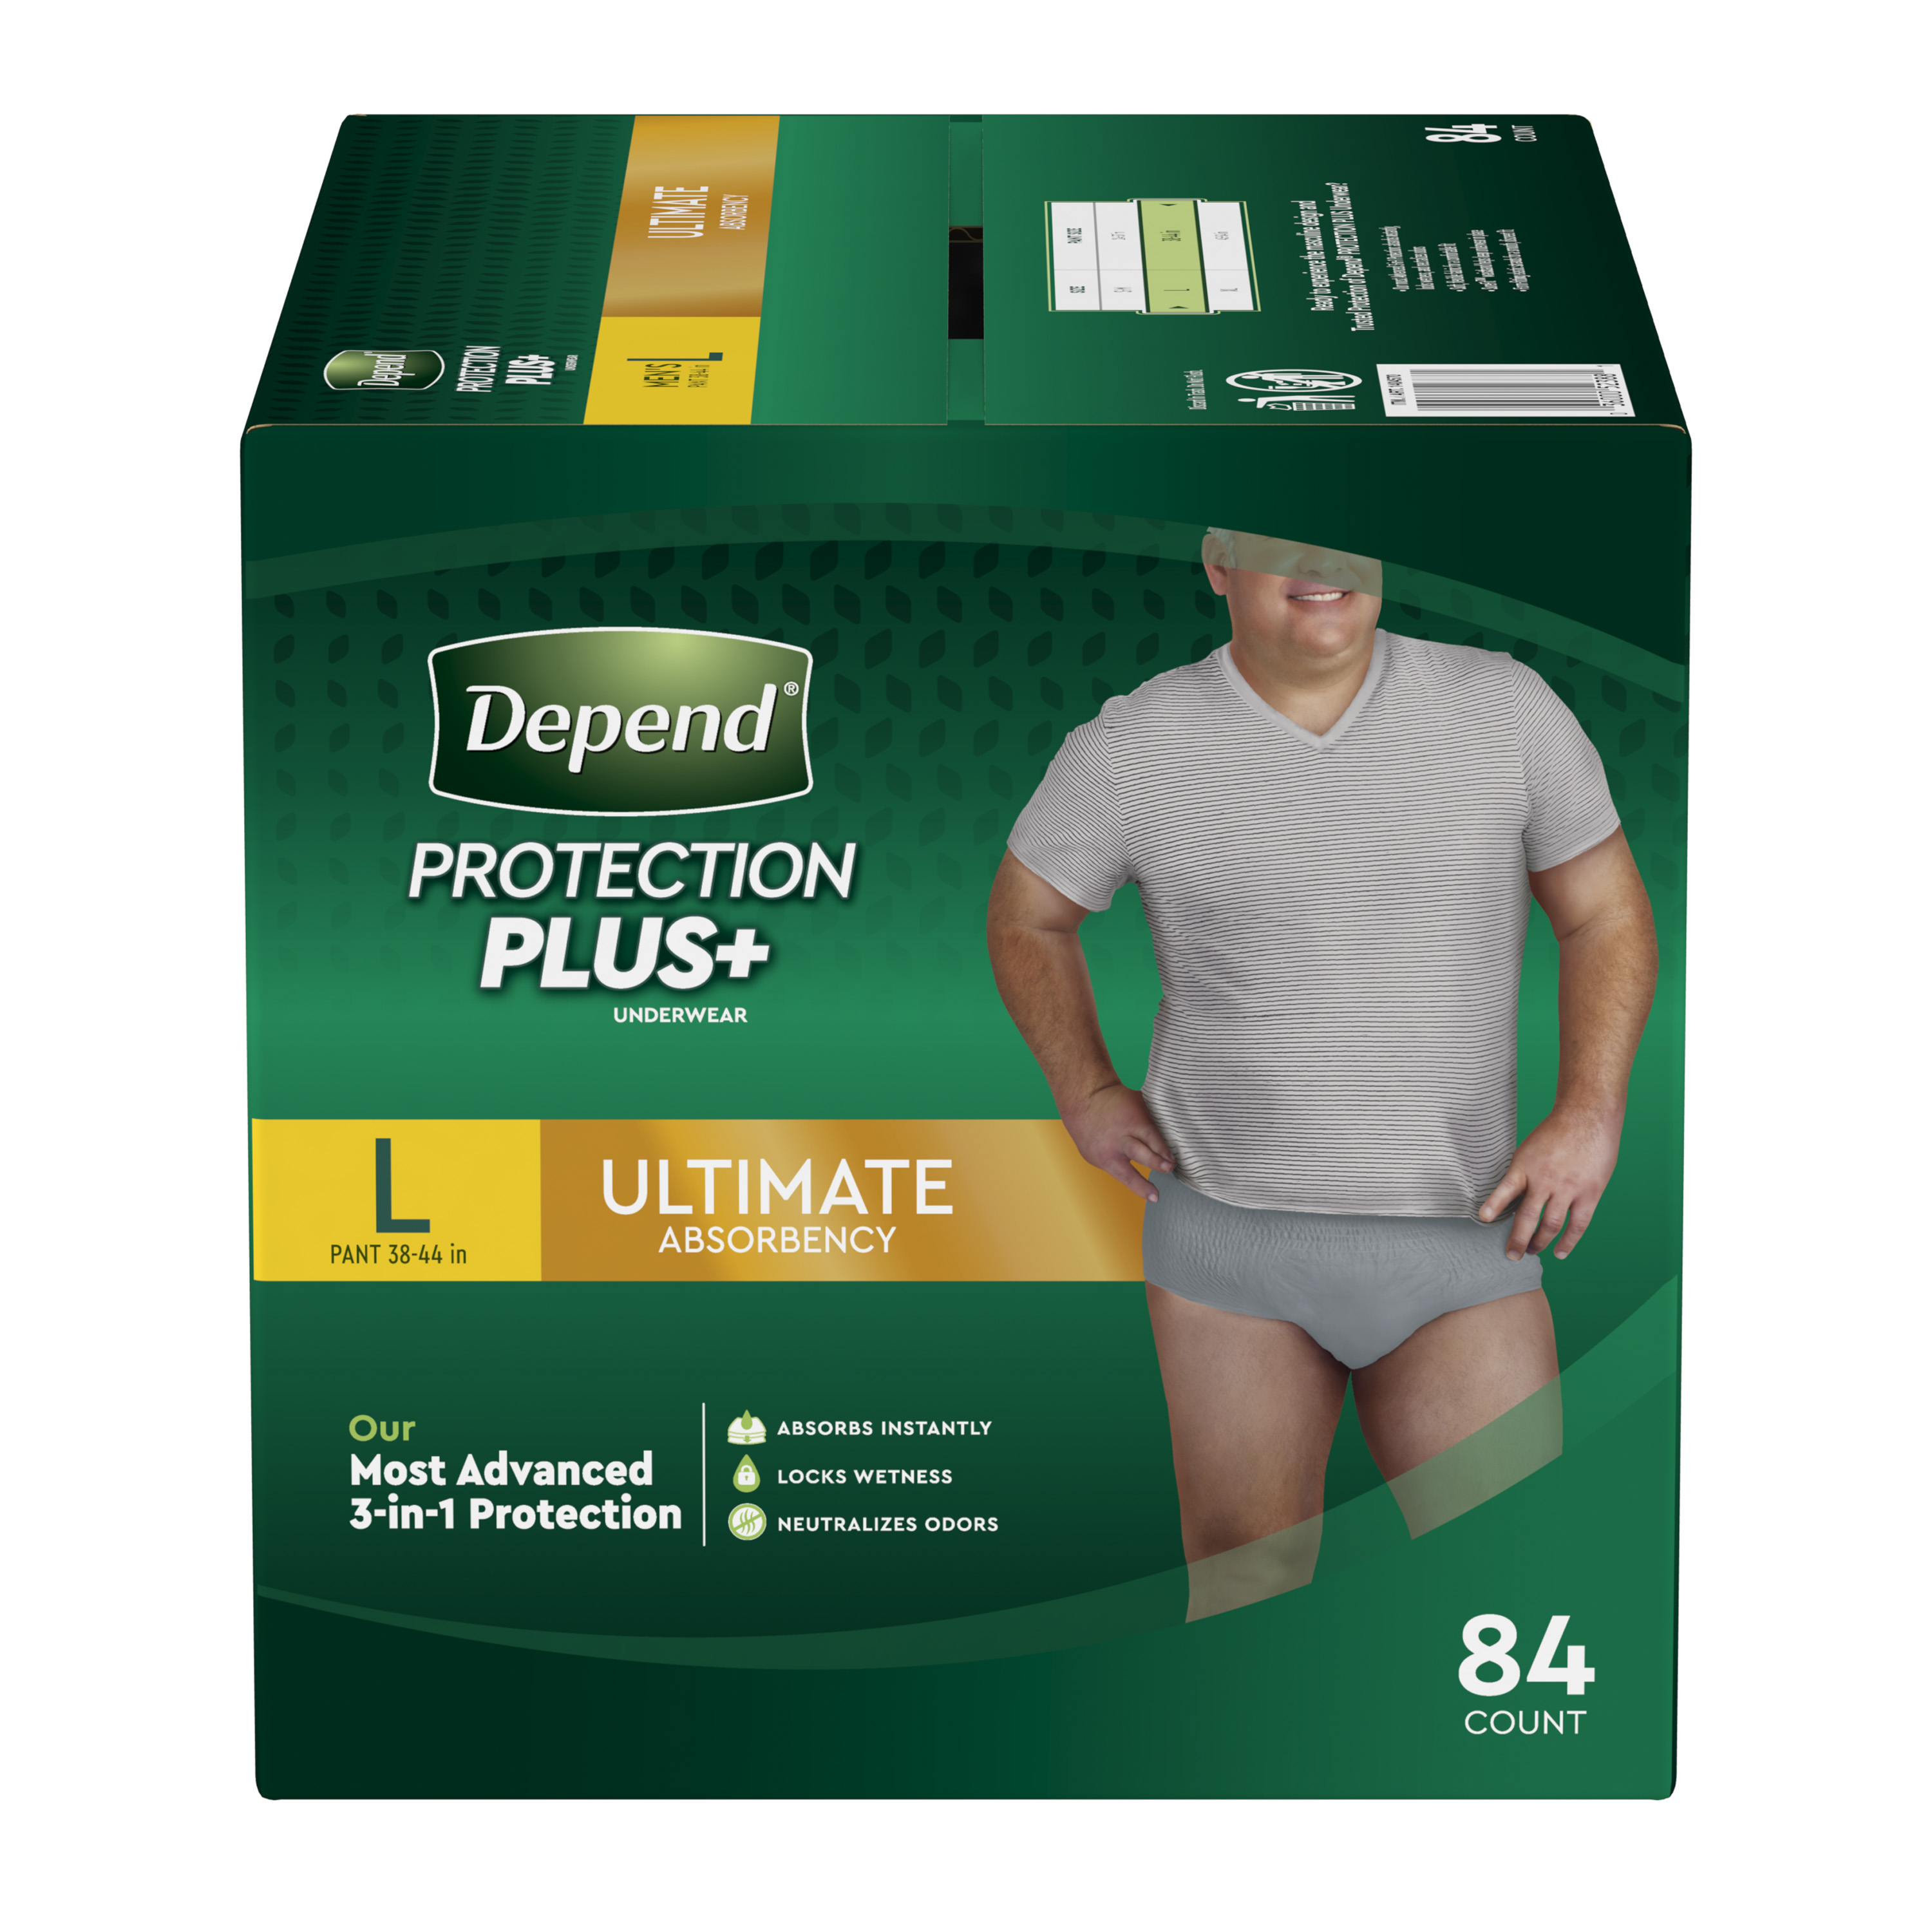 Depend® Protection Plus+ Underwear for Men Ultimate Absorbency (S-M/L/XL)